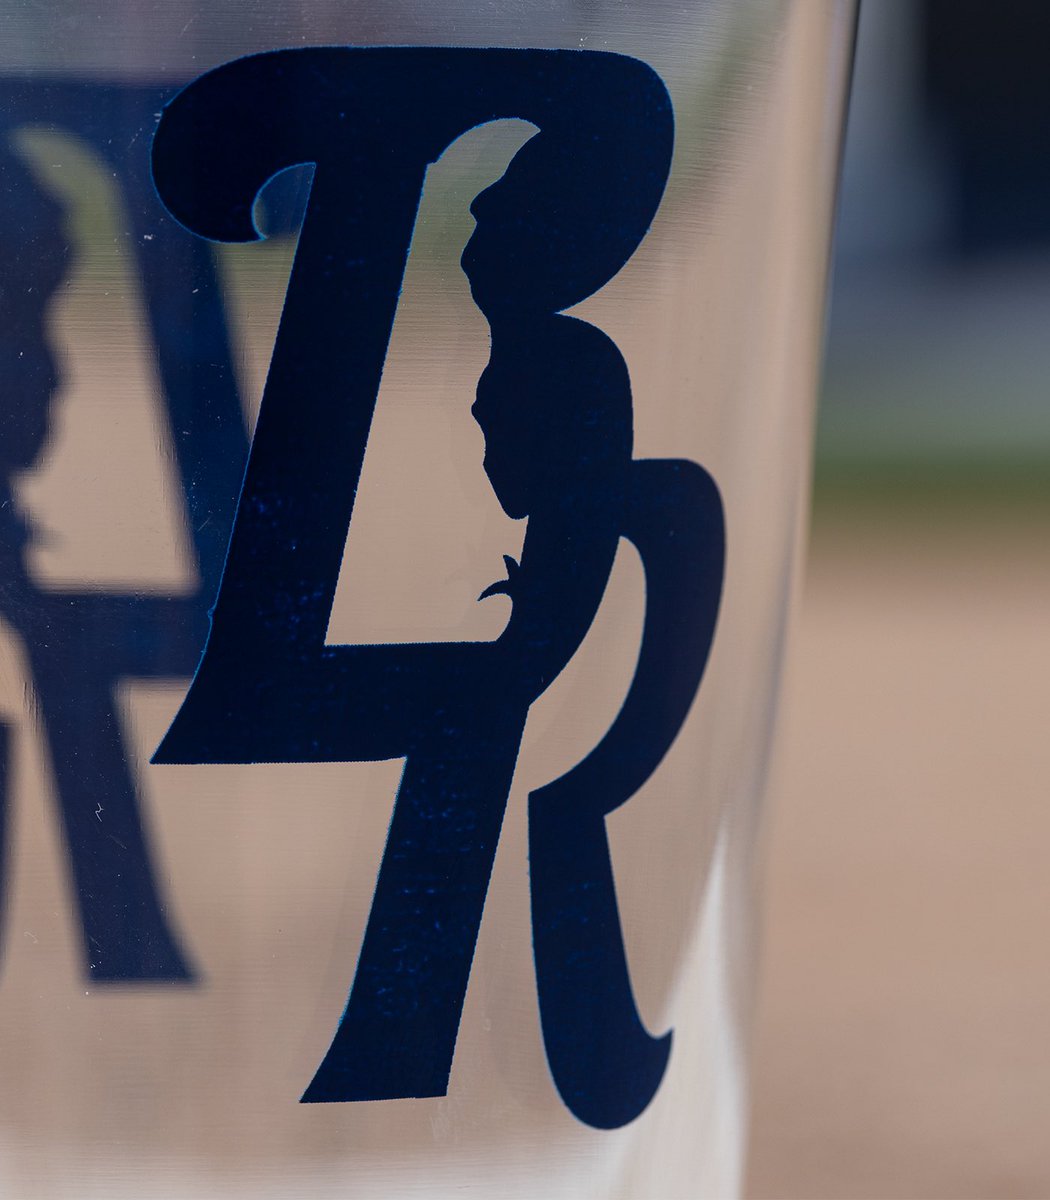 First 𝟓𝟎𝟎 fans through the gates tonight will receive this 𝐁𝐑 Pint Glass❗️ 🎟️🔗 atmilb.com/3PY4YgE